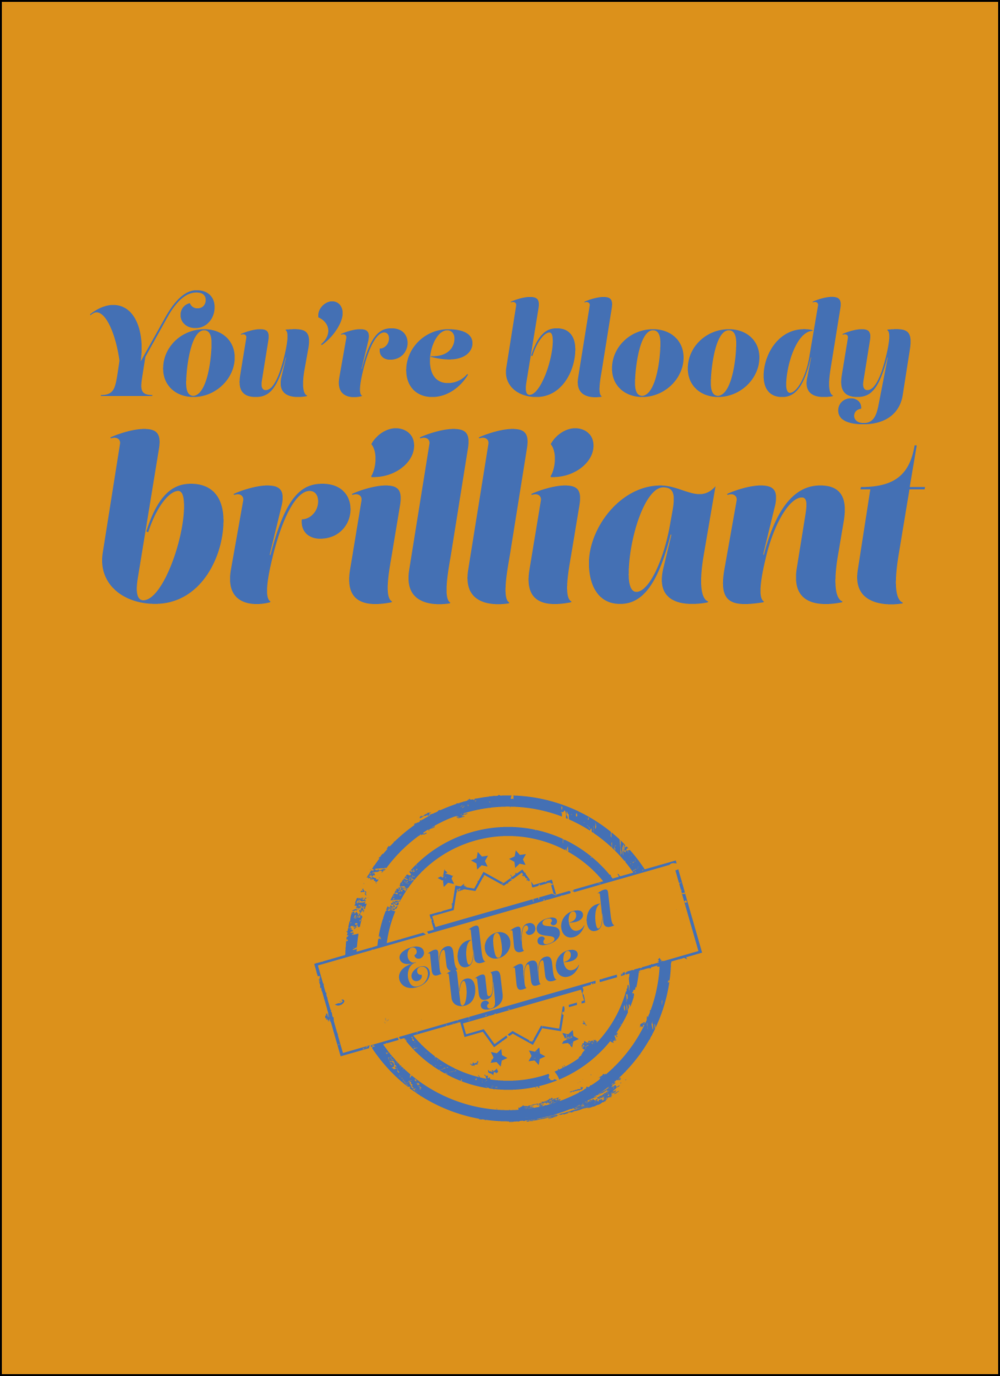 bloodybrilliant-01.png